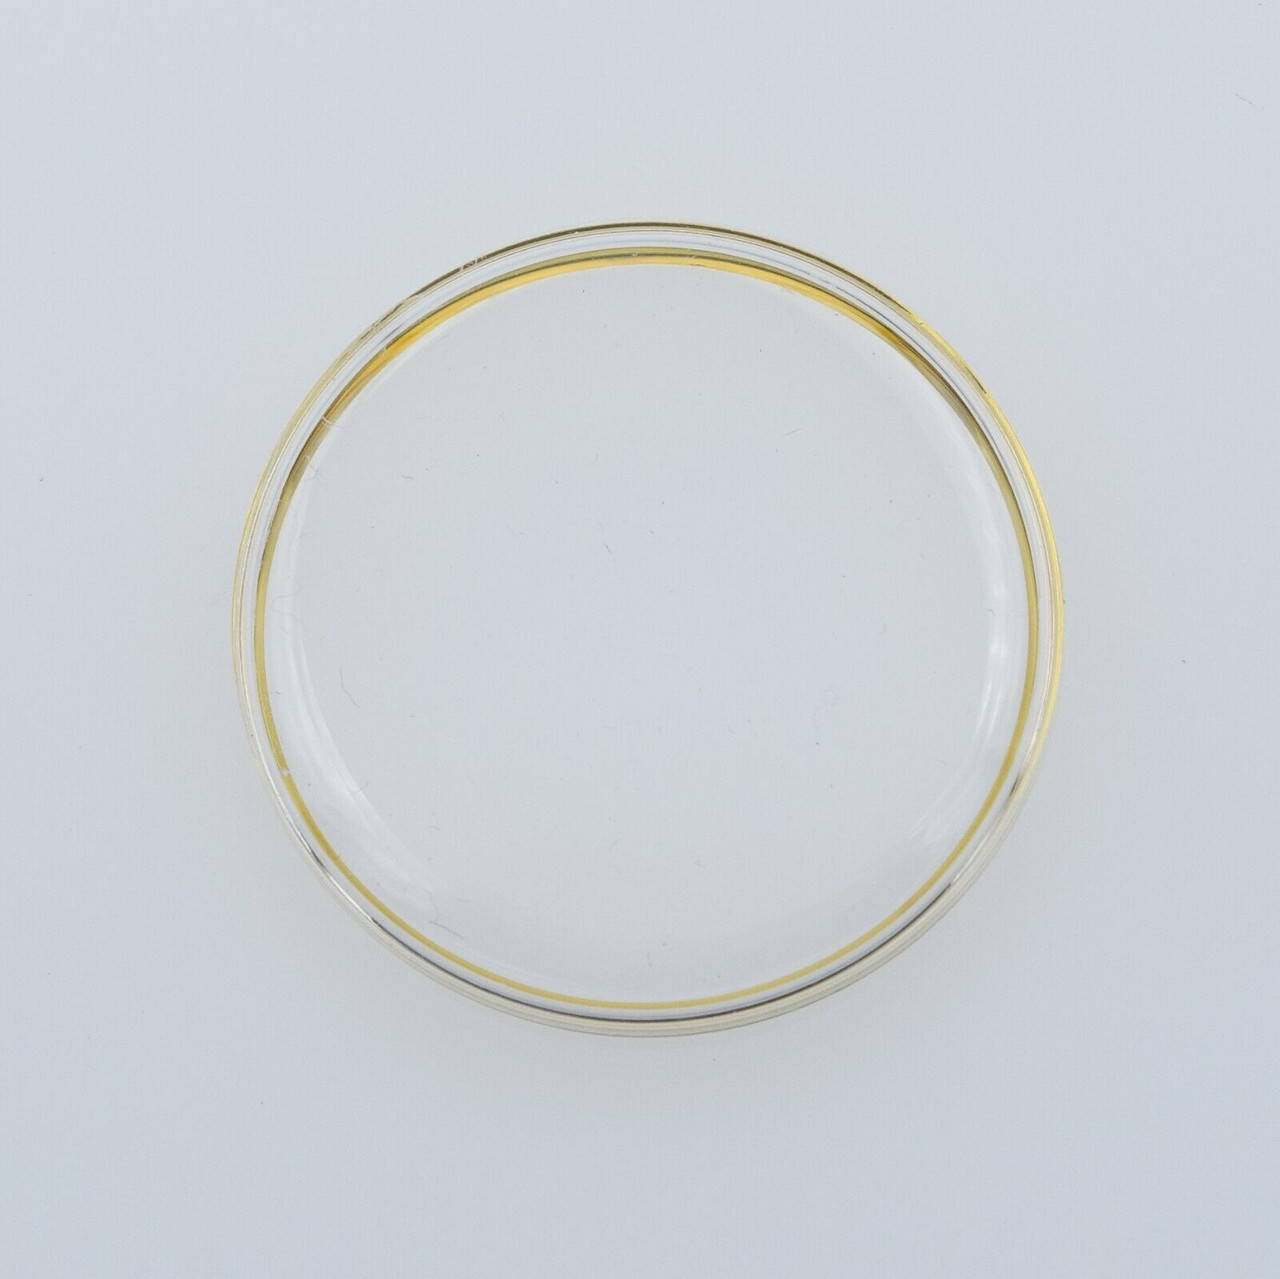 29.6mm Watch Crystal For Omega PZ 5000 With Yellow Tension Ring